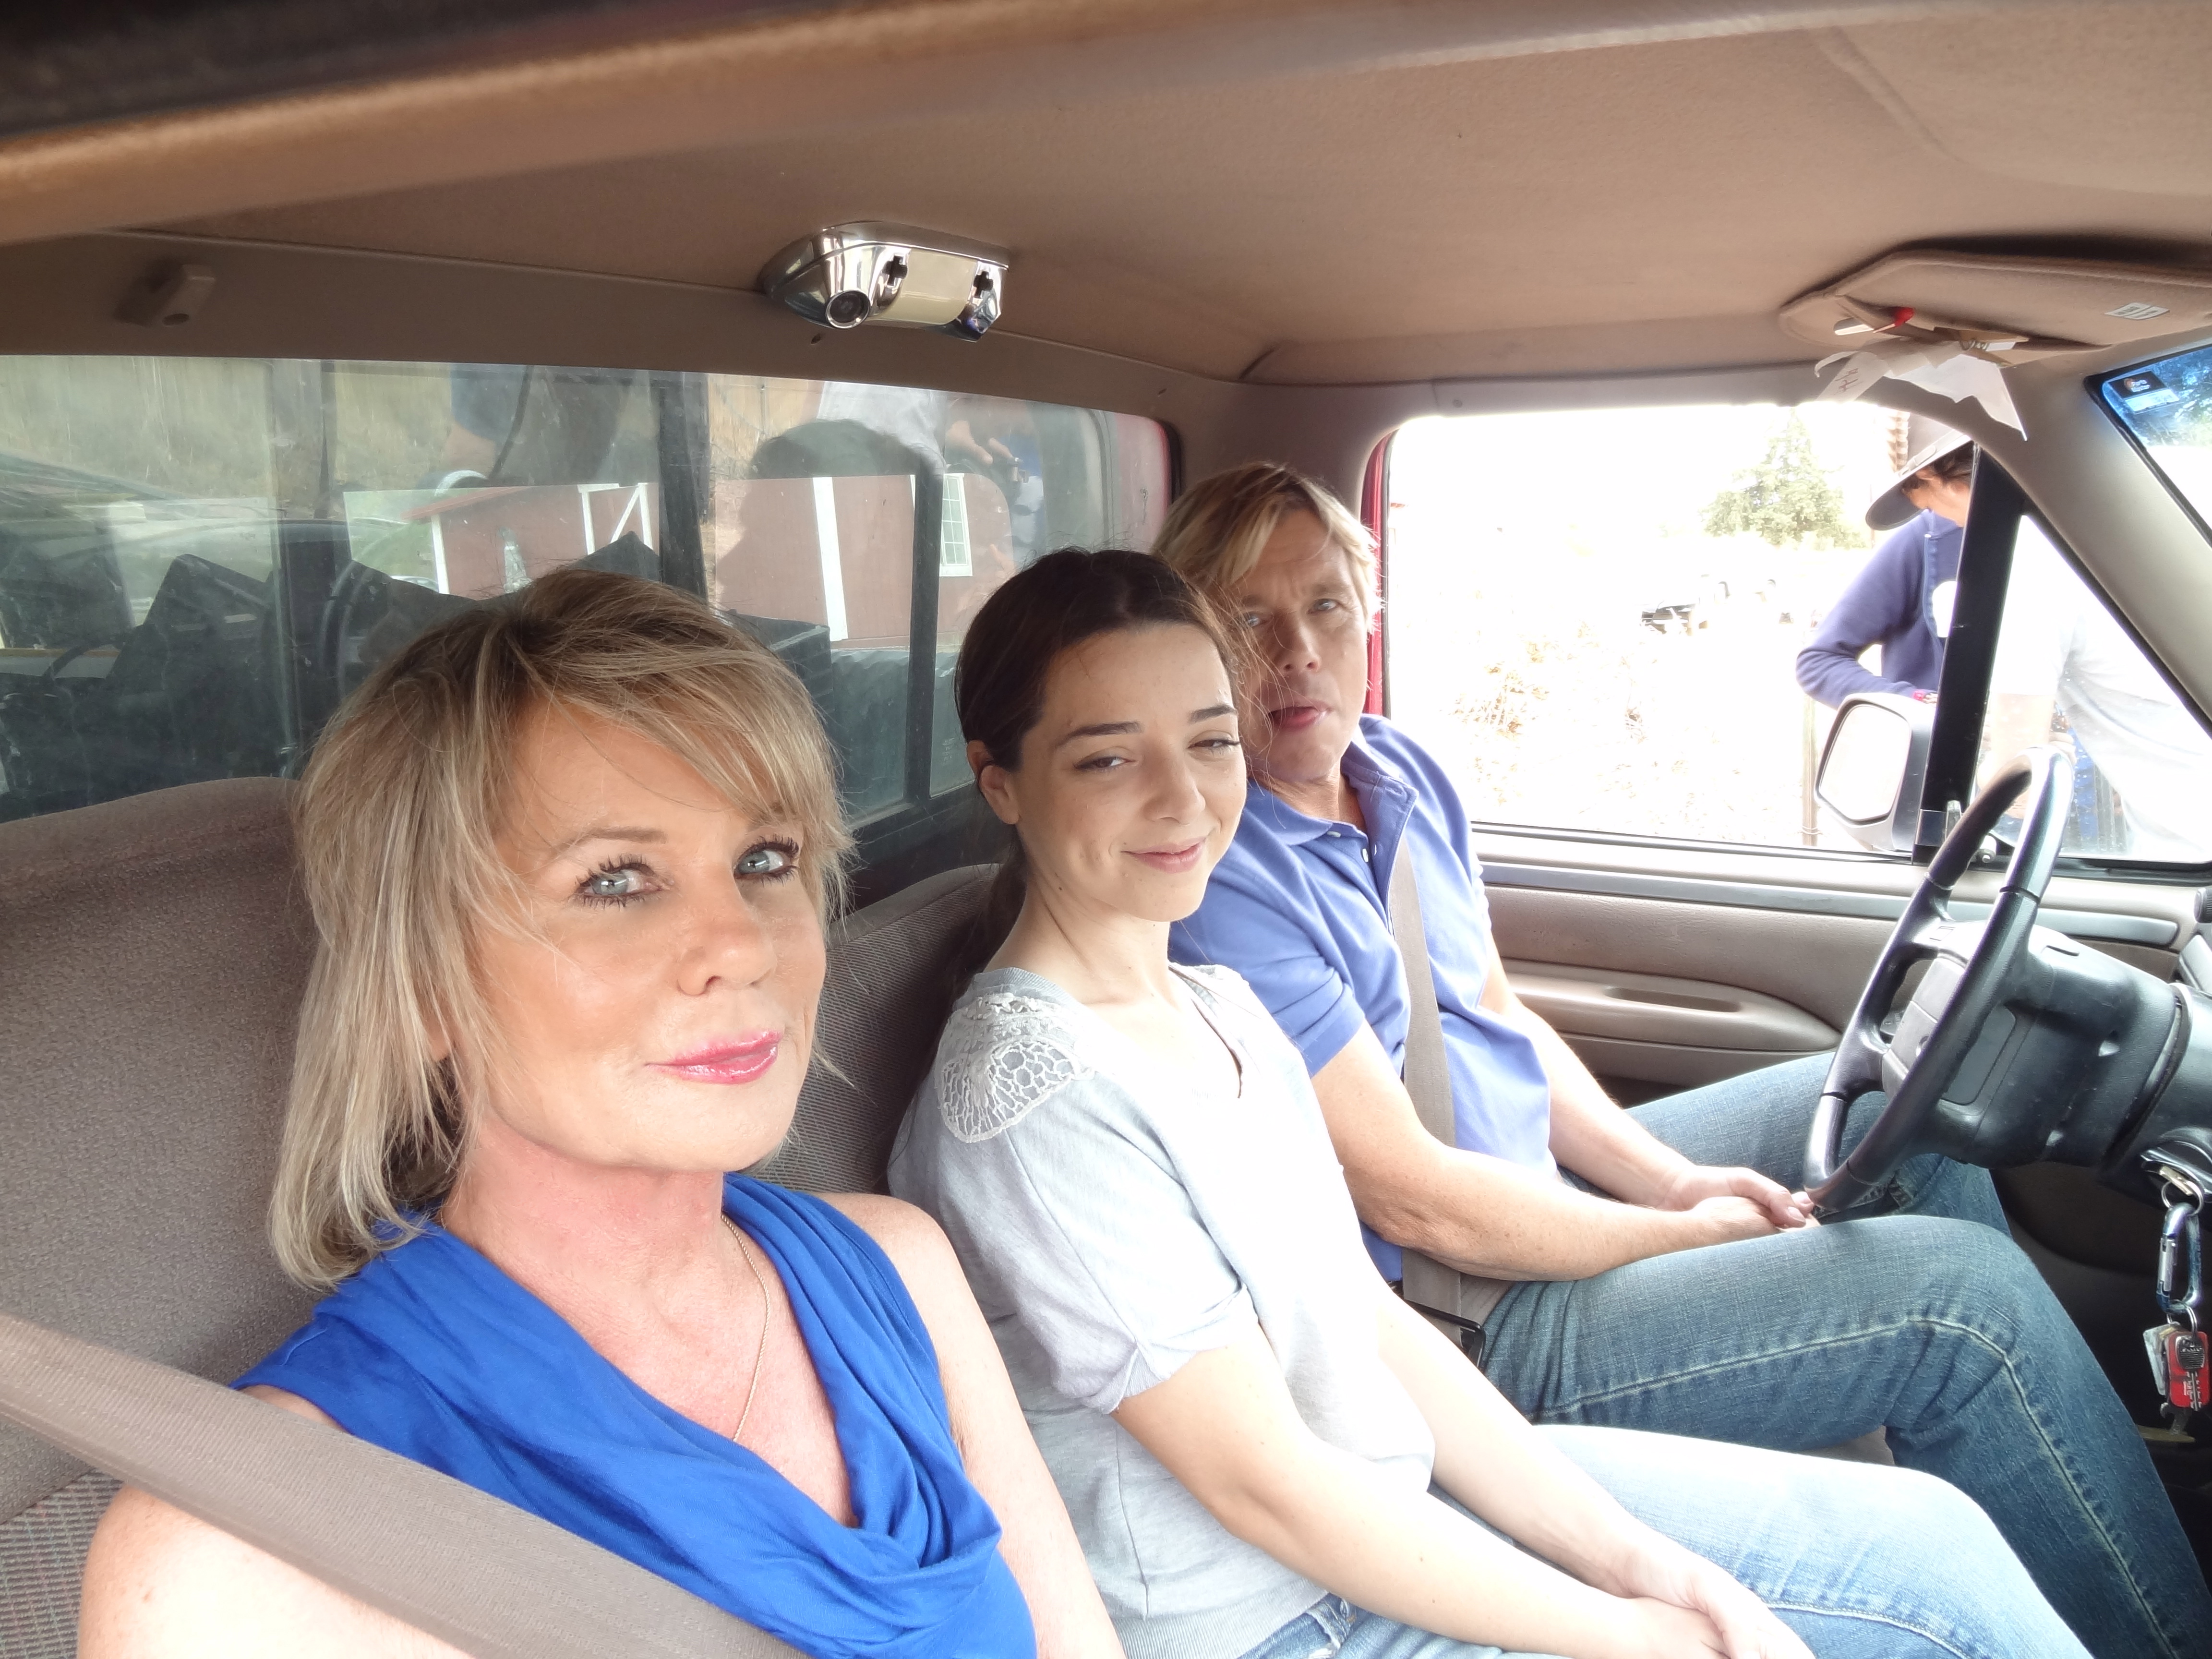 Ellen (Kandra KIng), Maggie (Melissa Tucker) and Henry (Christopher Atkins) filming Lake of Fire, 2014